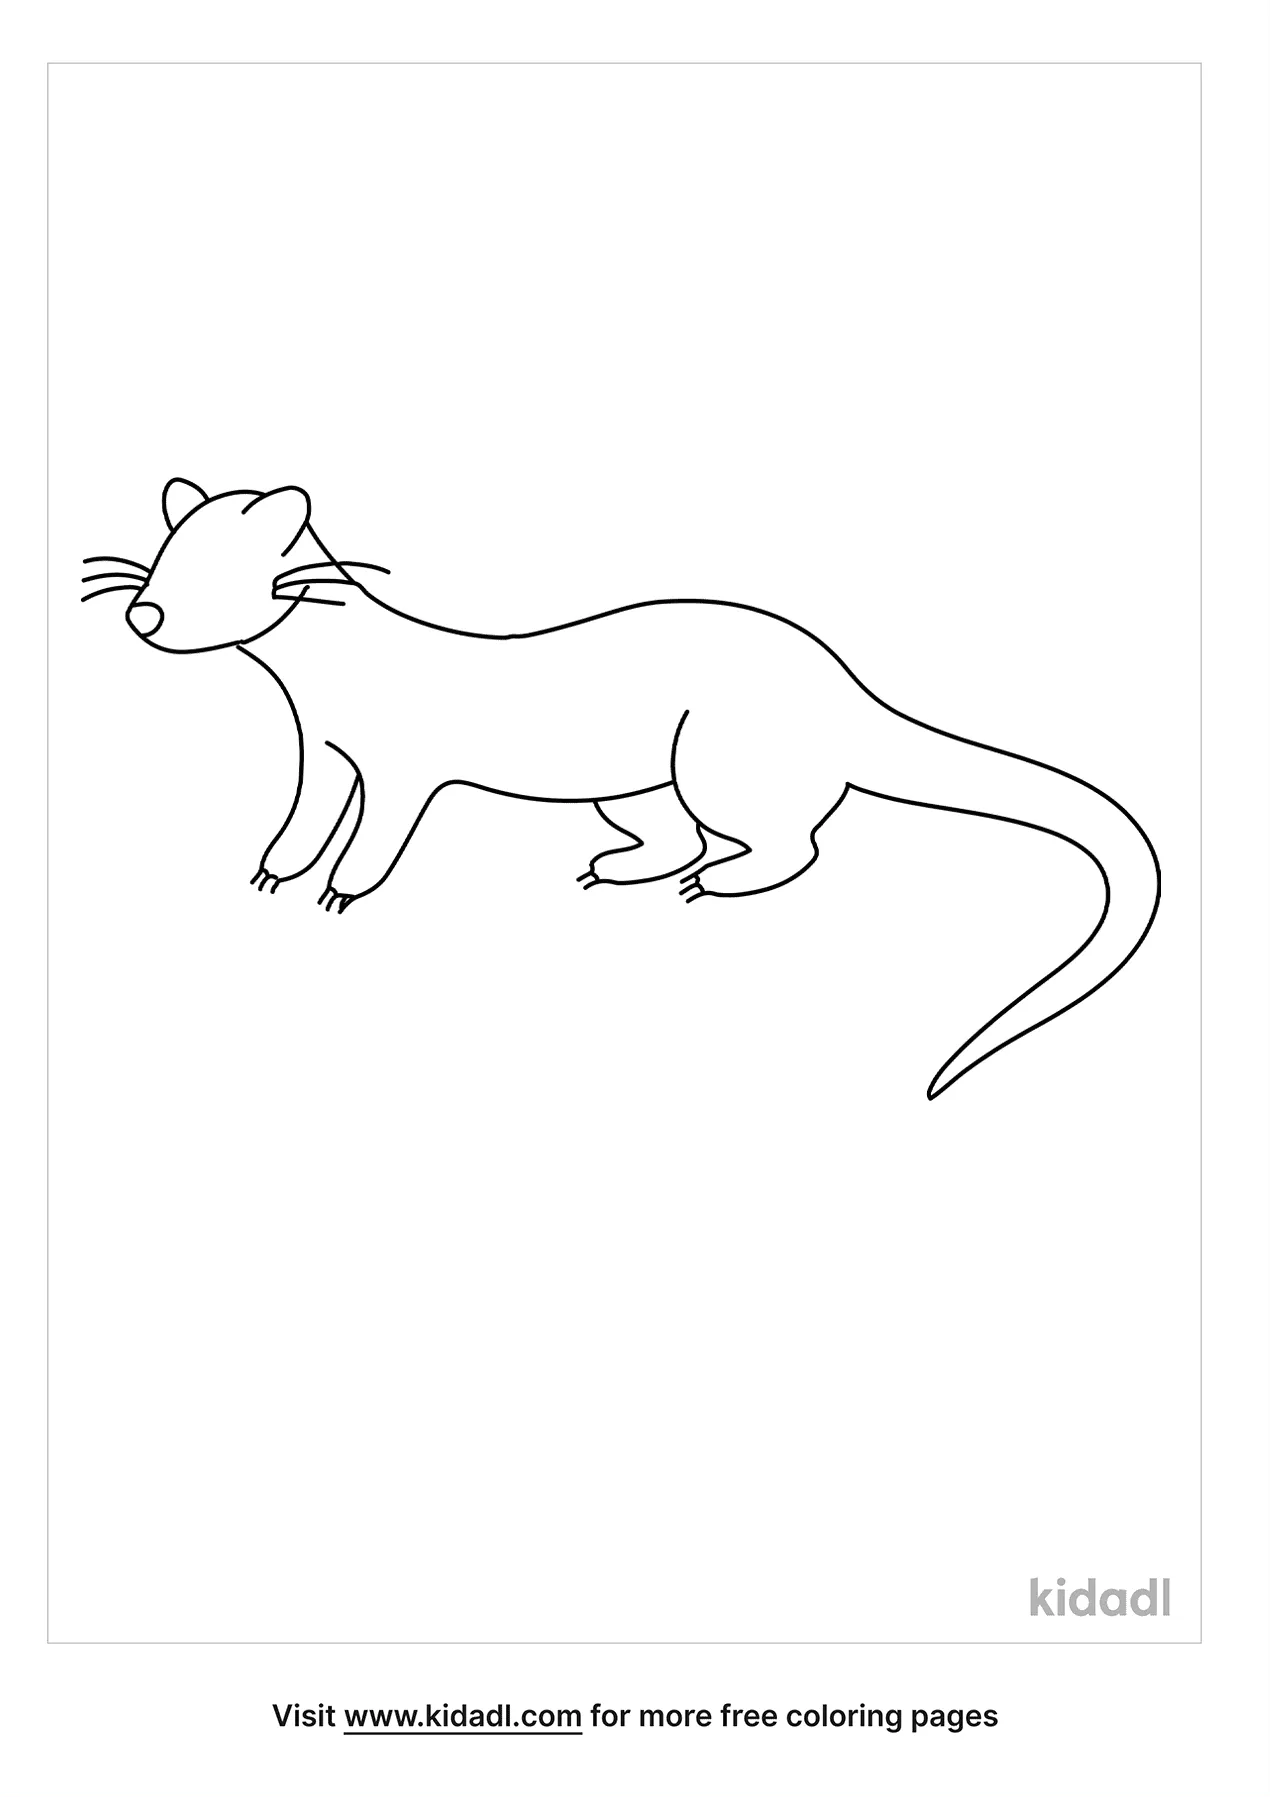 Ferret Outline Coloring Page